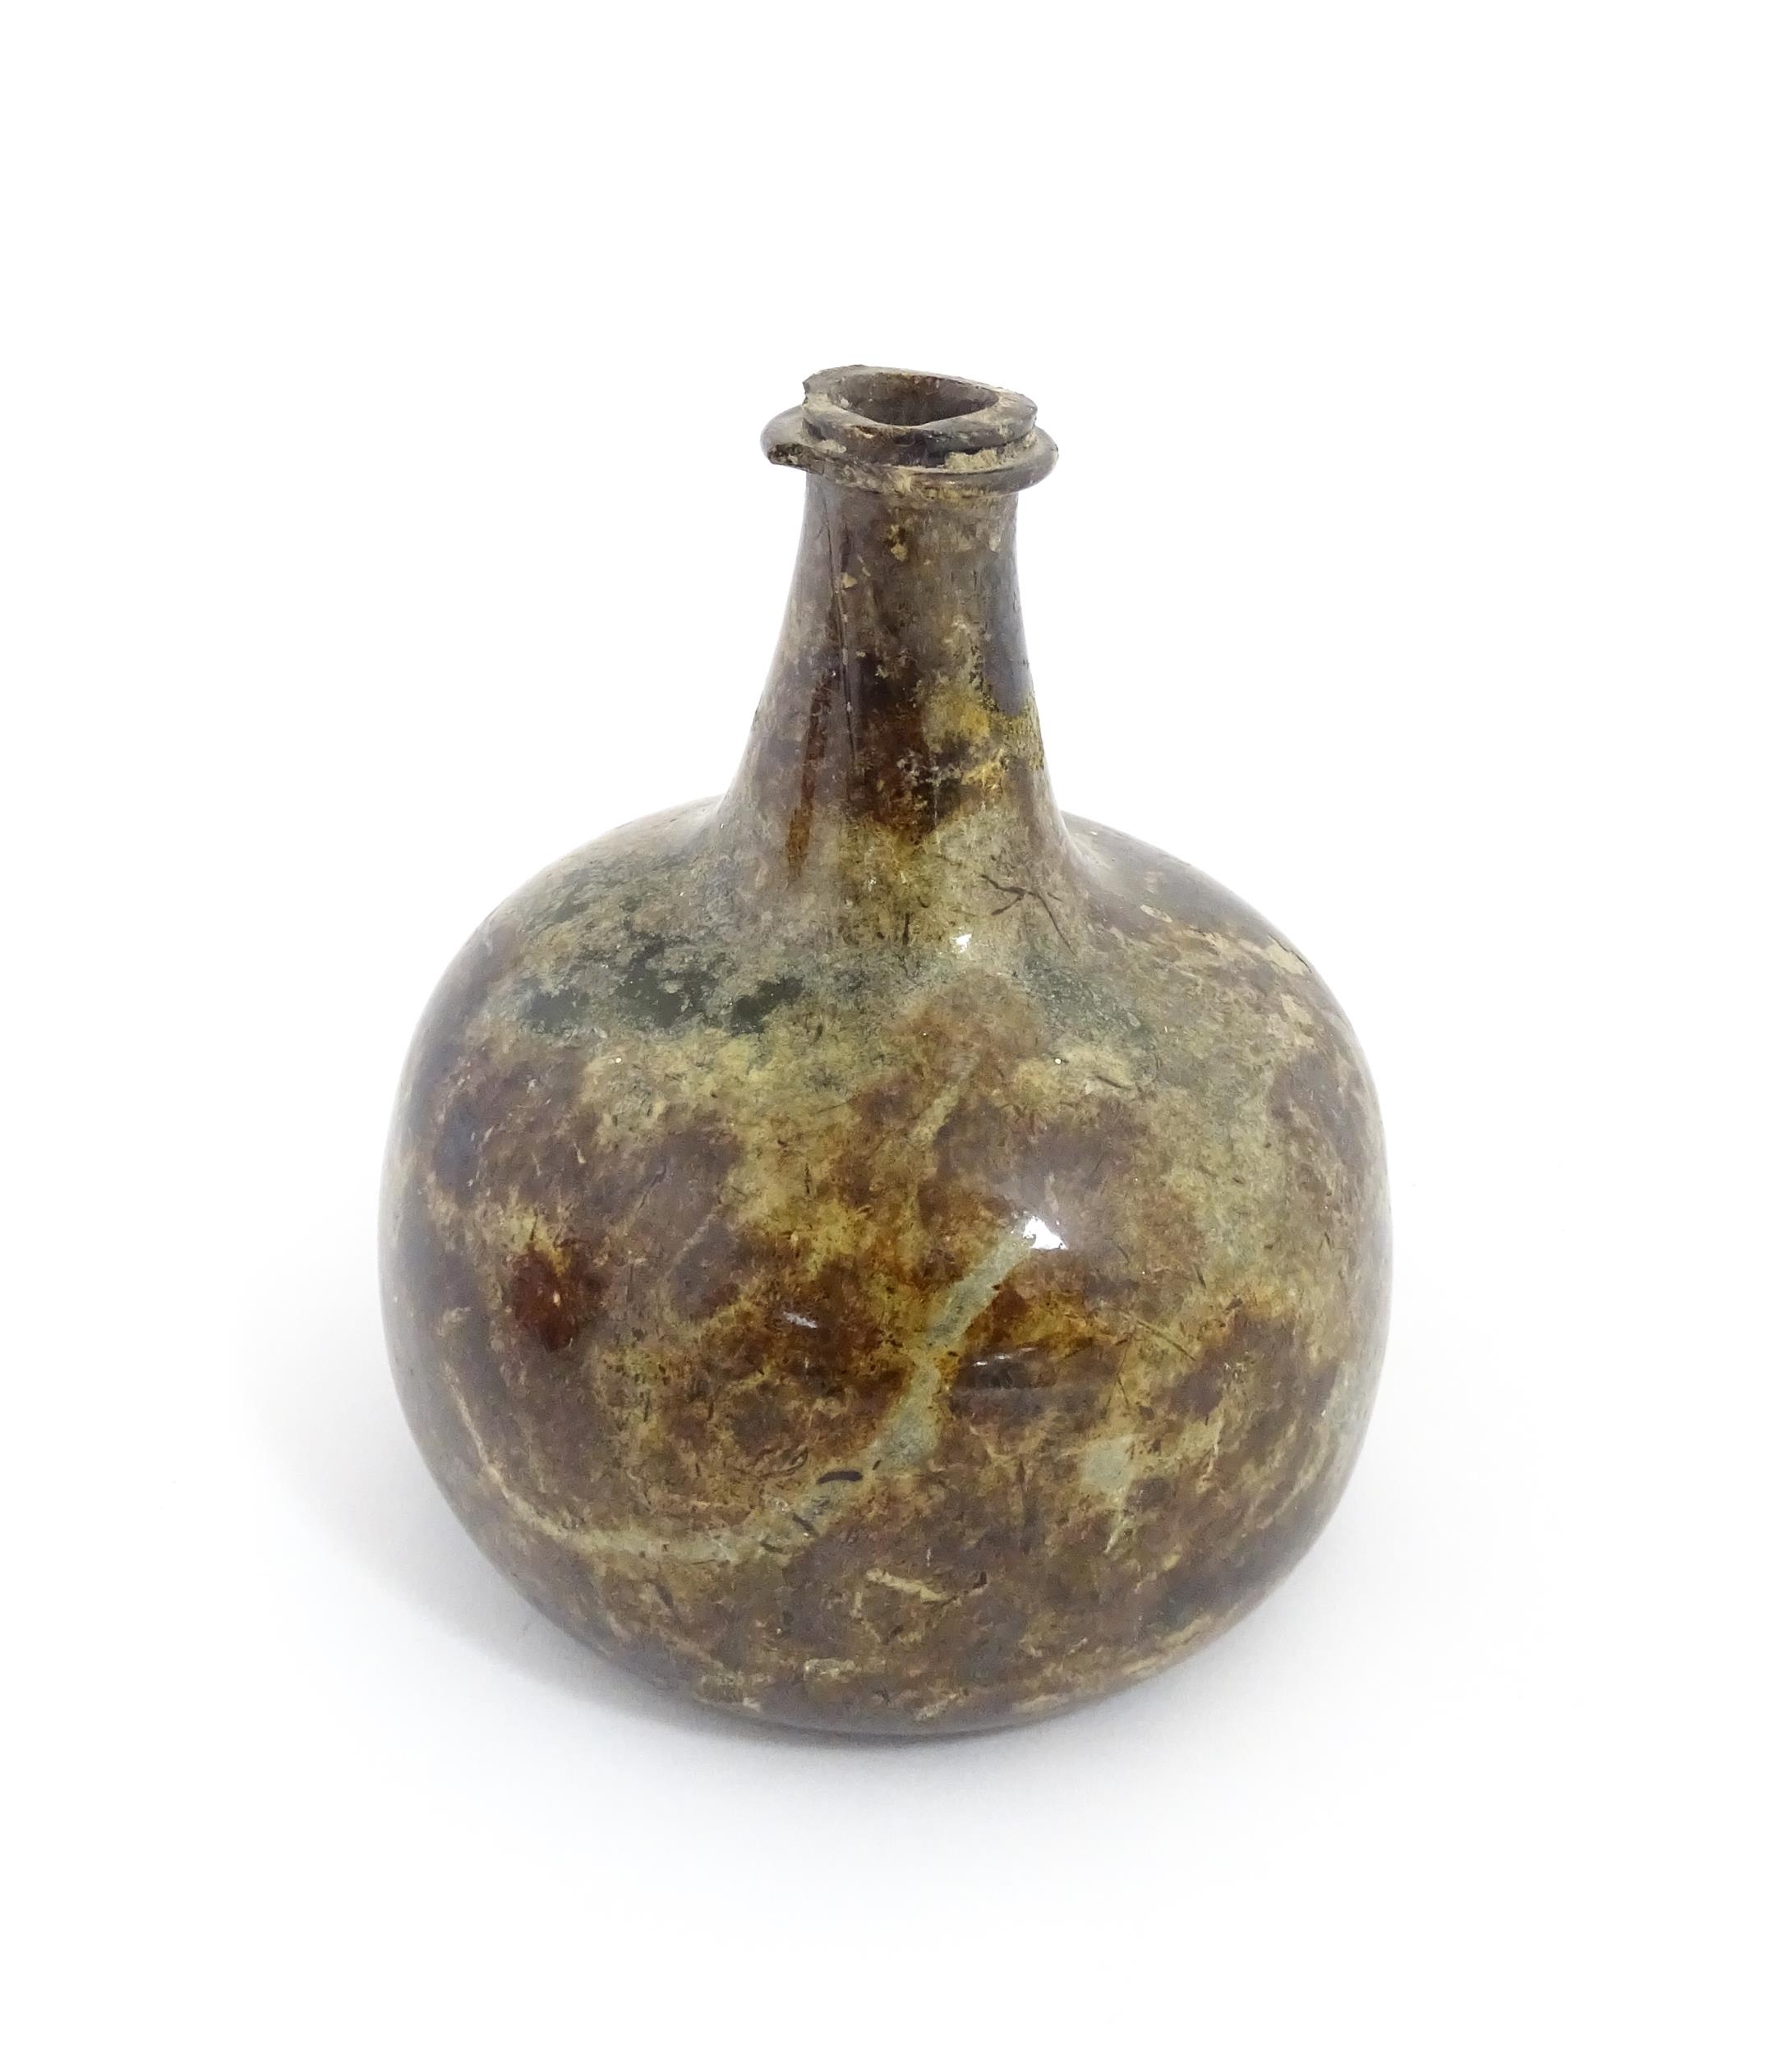 A late 18thC / early 19thC English dark olive green glass onion shape wine bottle. Approx. 6" high - Image 5 of 6